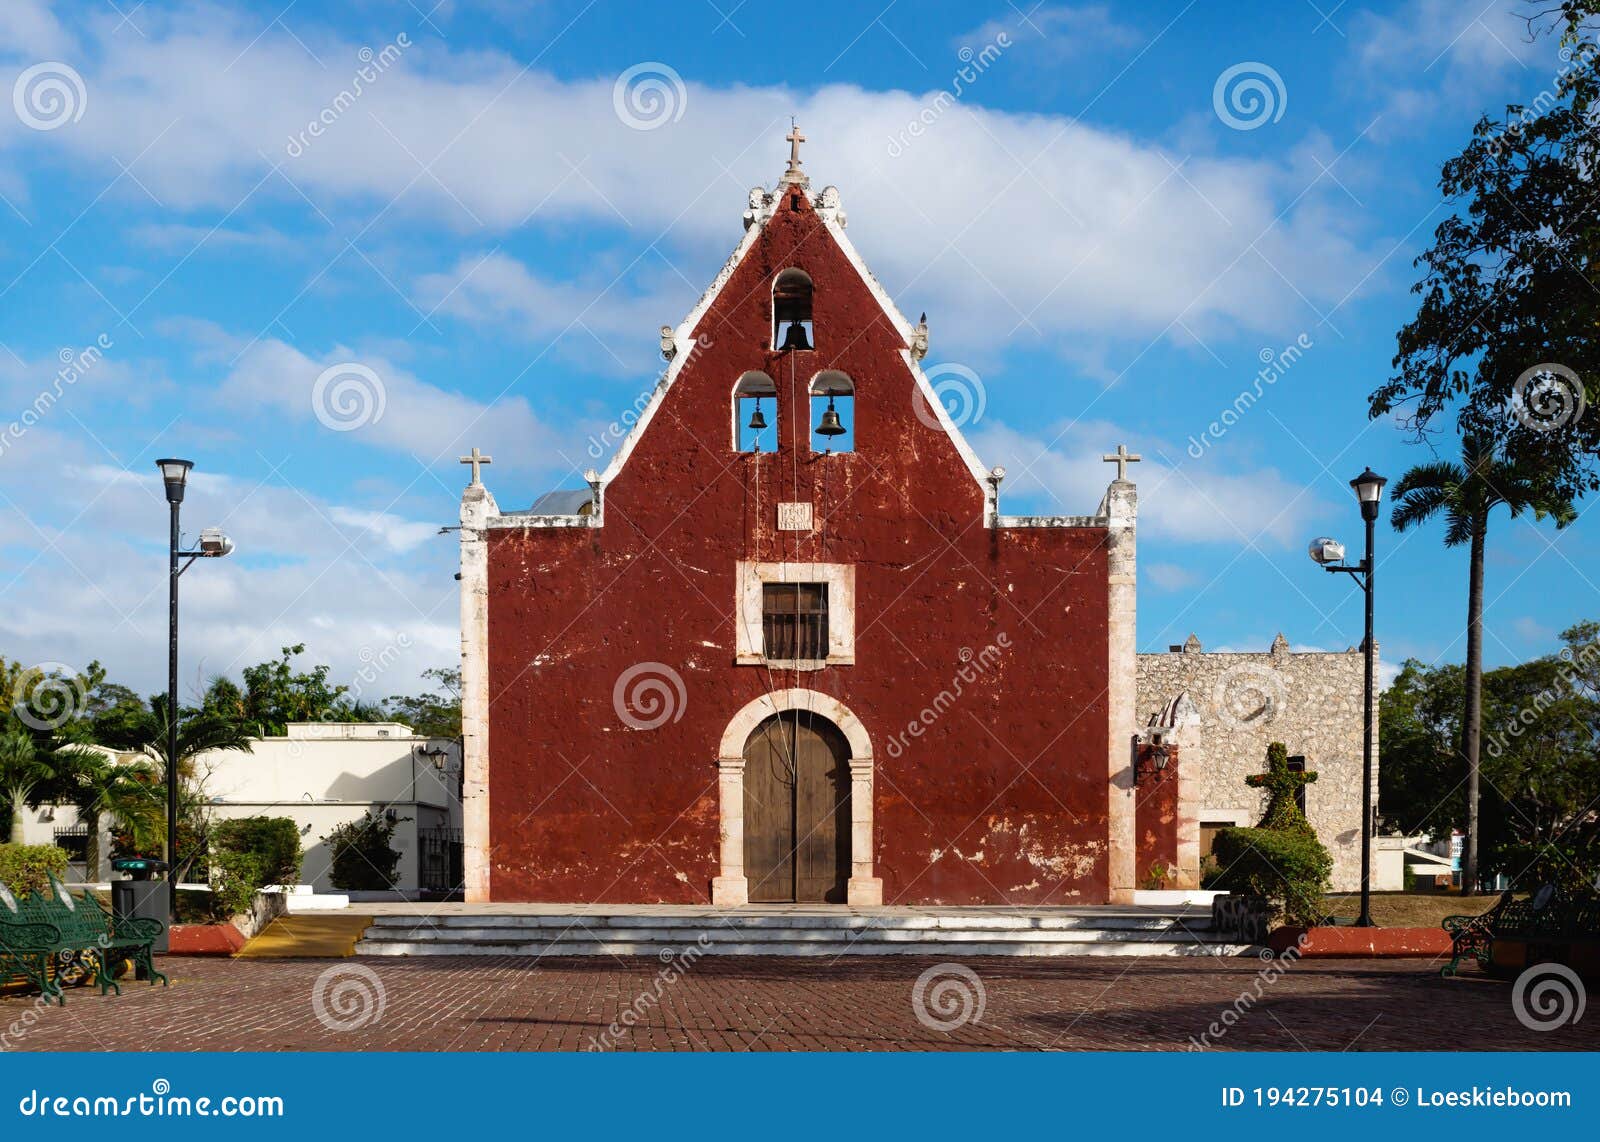 front of the red colonial church itzimna in a park with trees, merida, yucatan, mexico